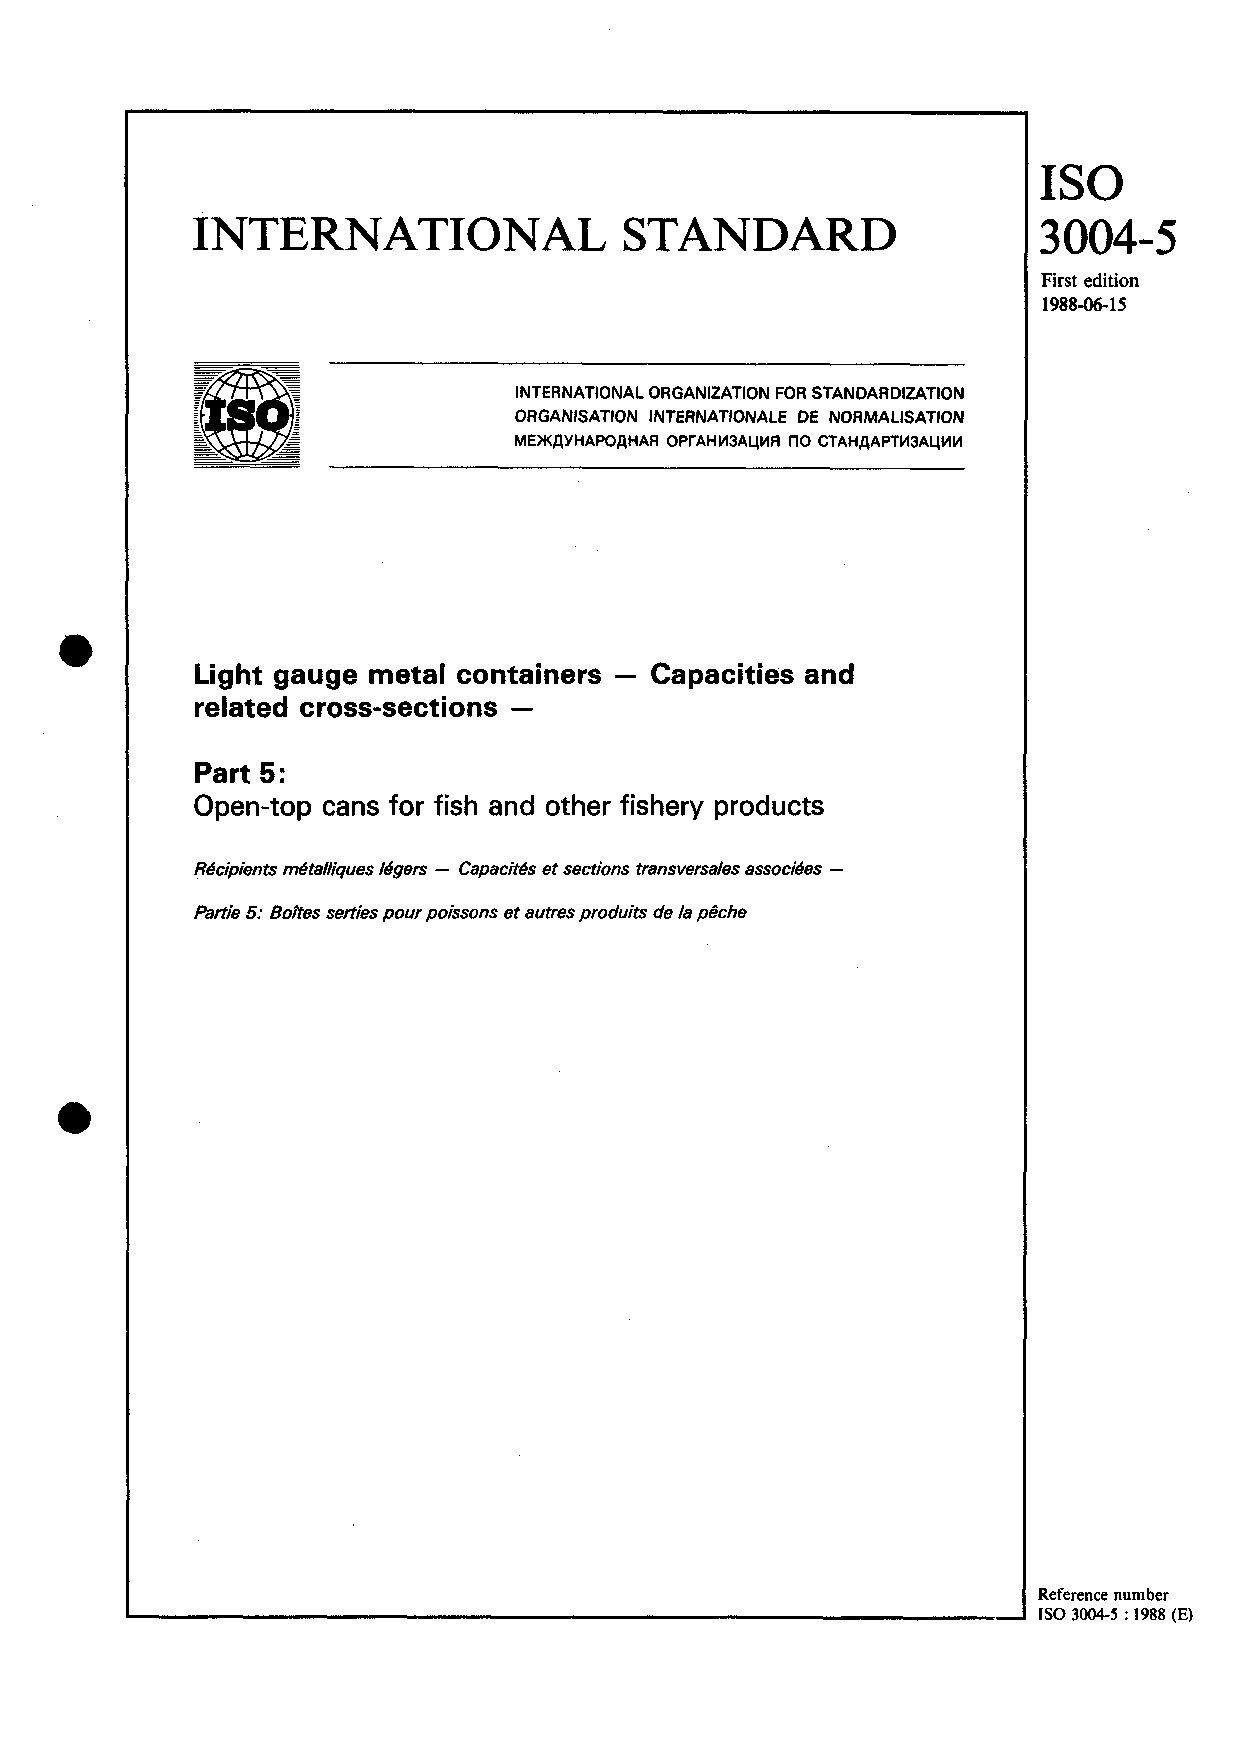 ISO 3004-5:1988